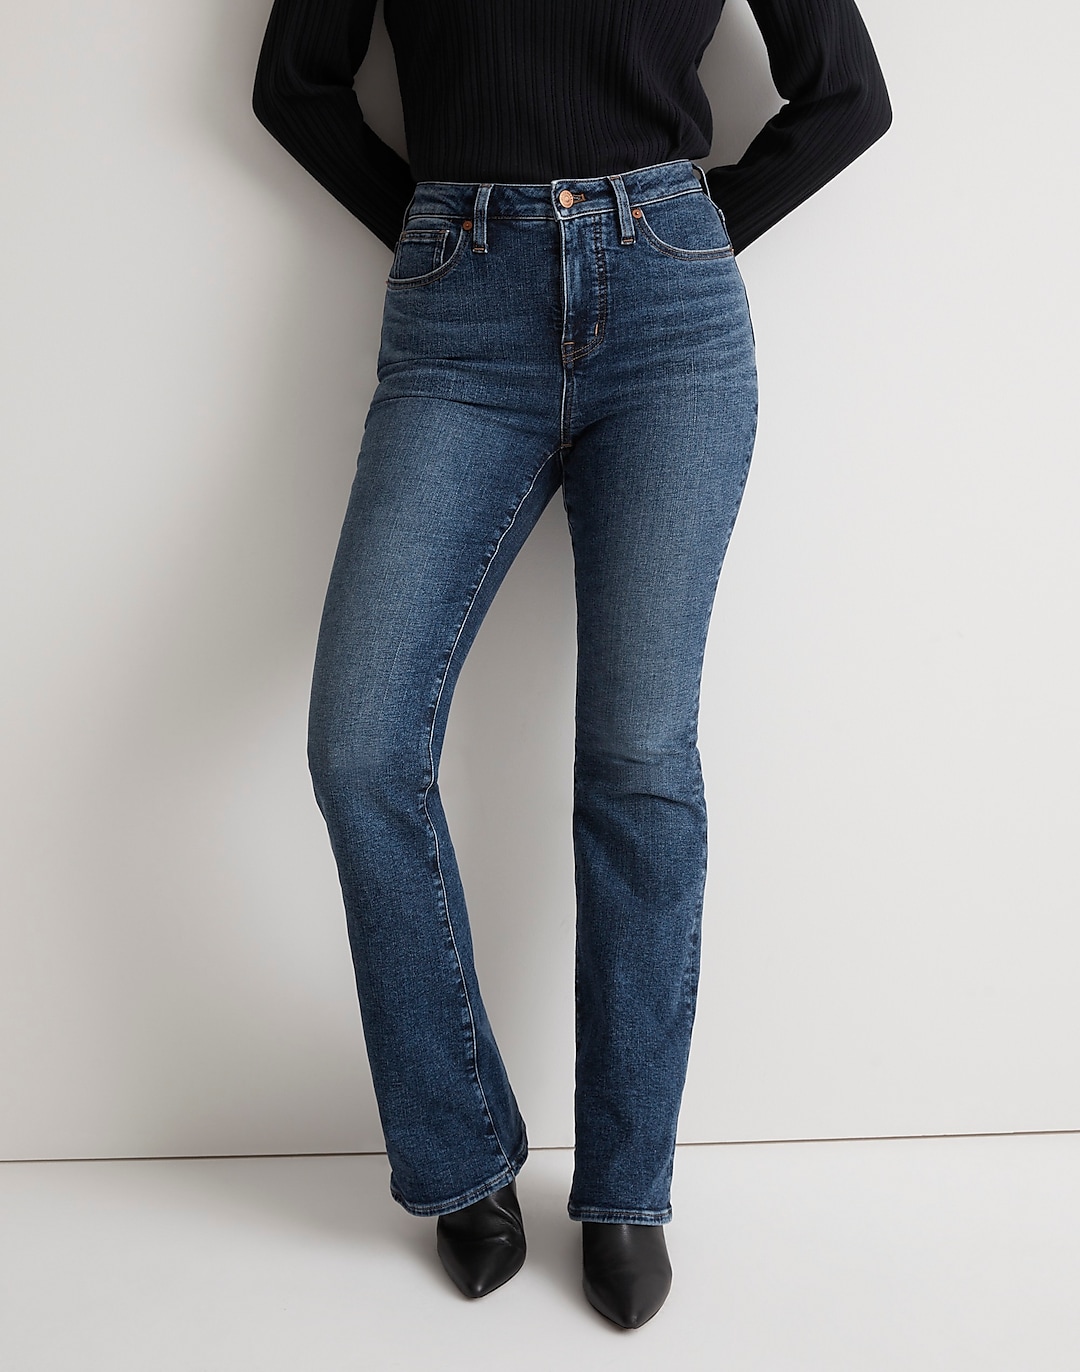 Curvy Skinny Flare Jeans in Alvord Wash: Instacozy Edition | Madewell